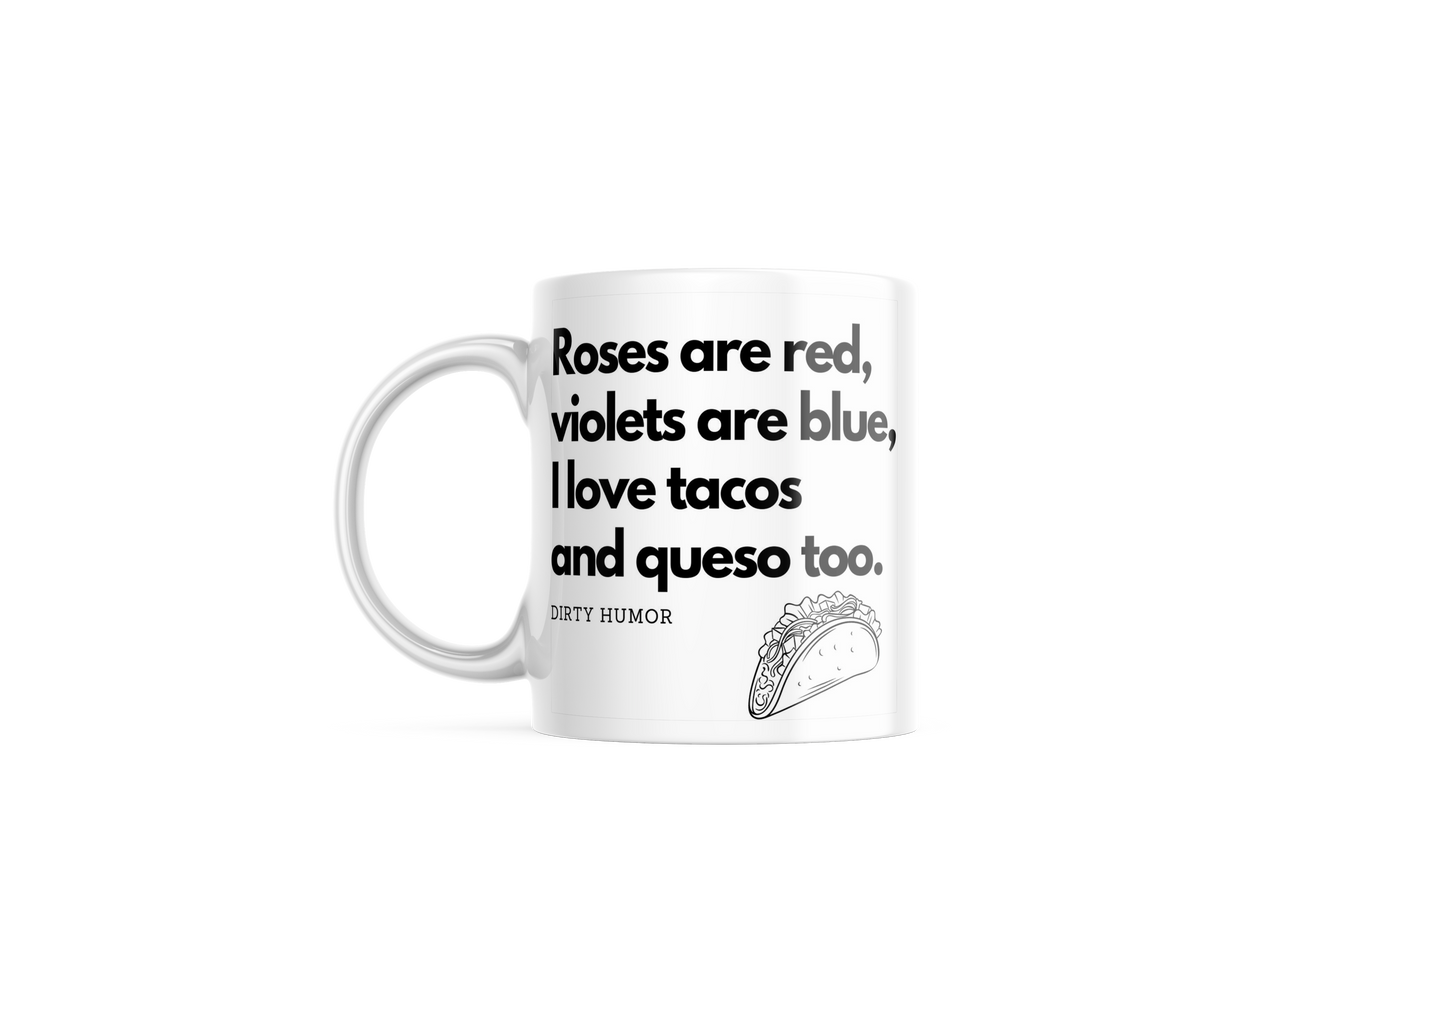 Roses are red, violets are blue, I love tacos and queso too.